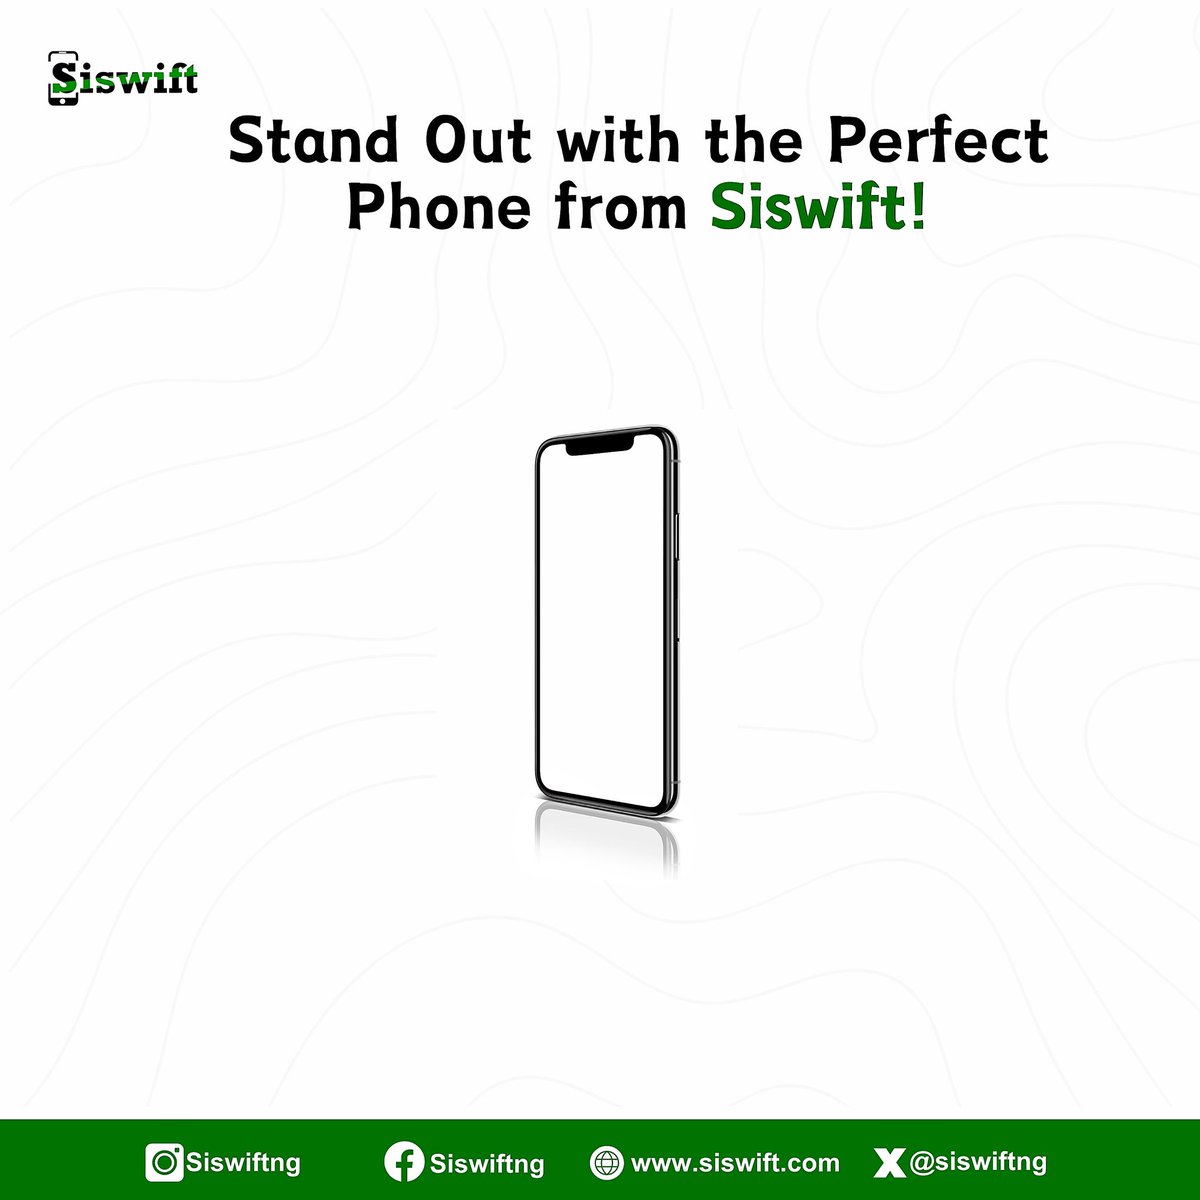 Shine bright with Siswift! 

Get the perfect phone and stand out. 
.
.
.
#Siswift #ShineBright #transparenttransactions #negotiationpower #changingthegame #convenience #convenienceoverfixedprices #digitalmarketing #iphones #phones